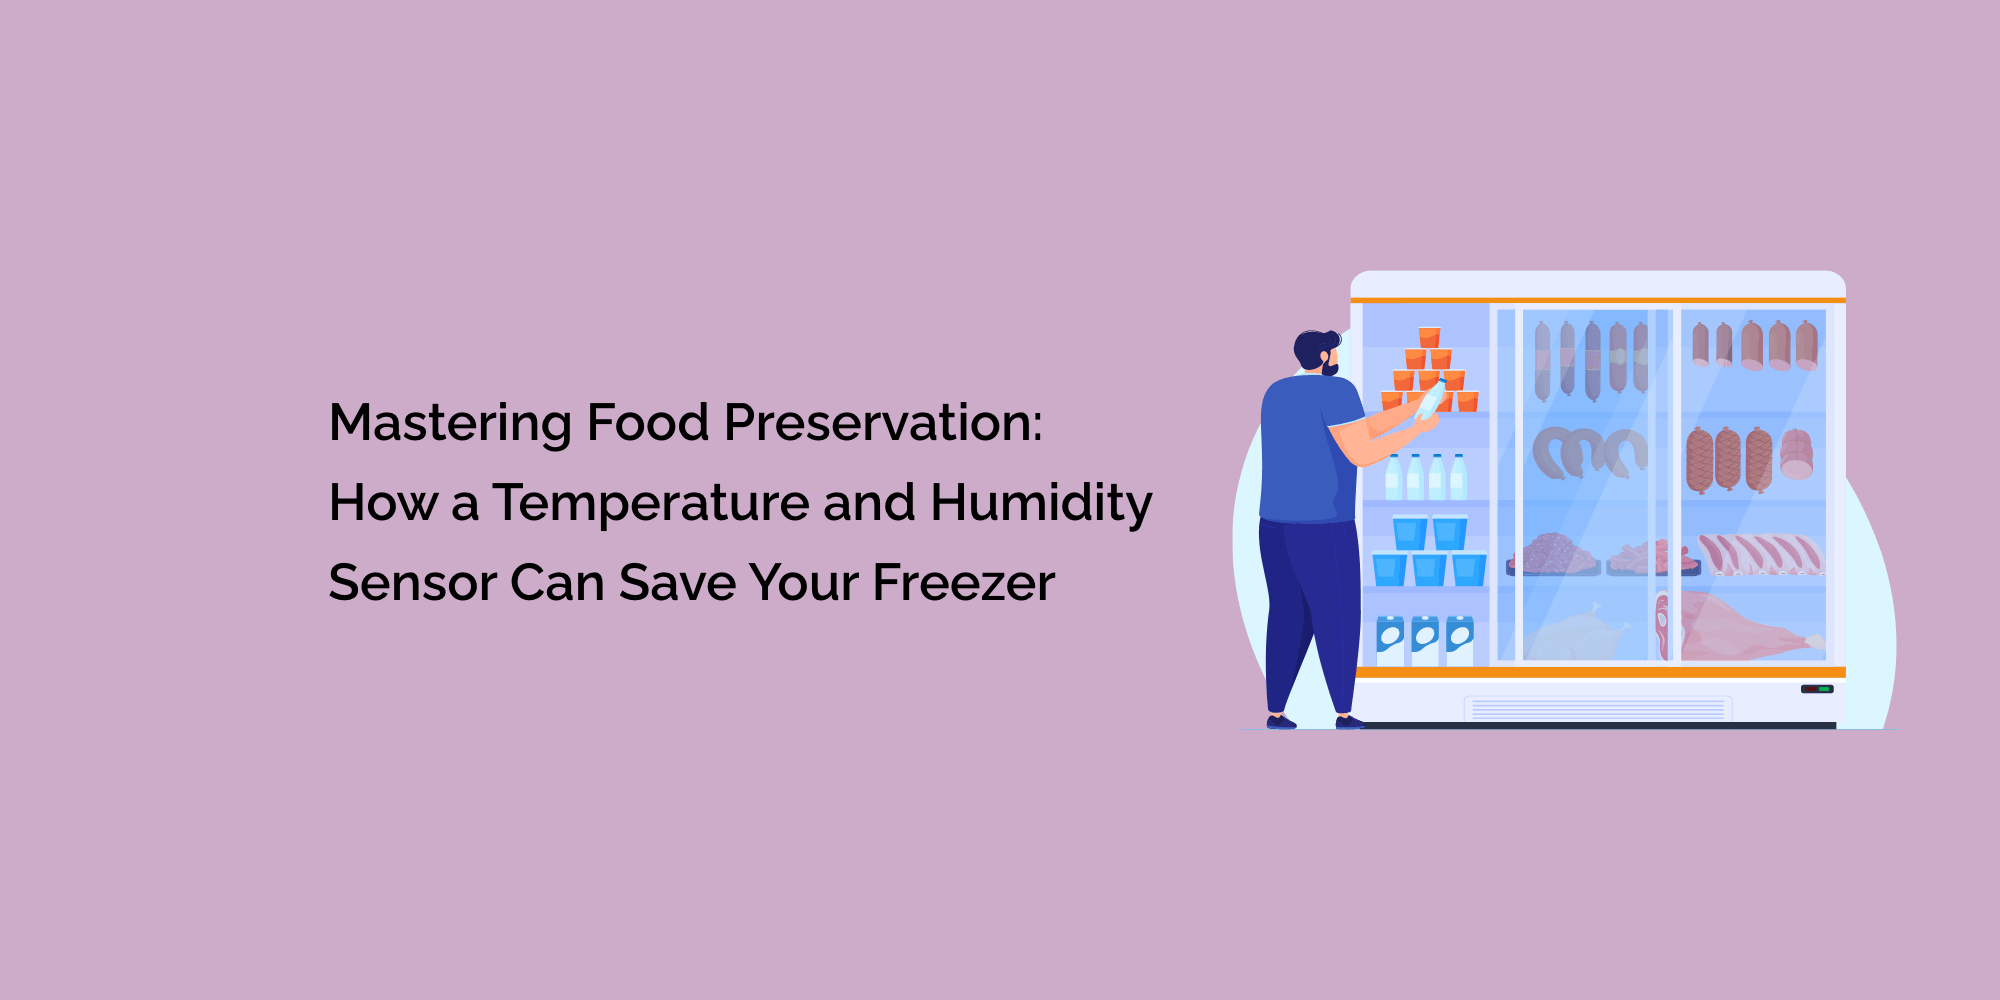 Mastering Food Preservation: How a Temperature and Humidity Sensor Can Save Your Freezer